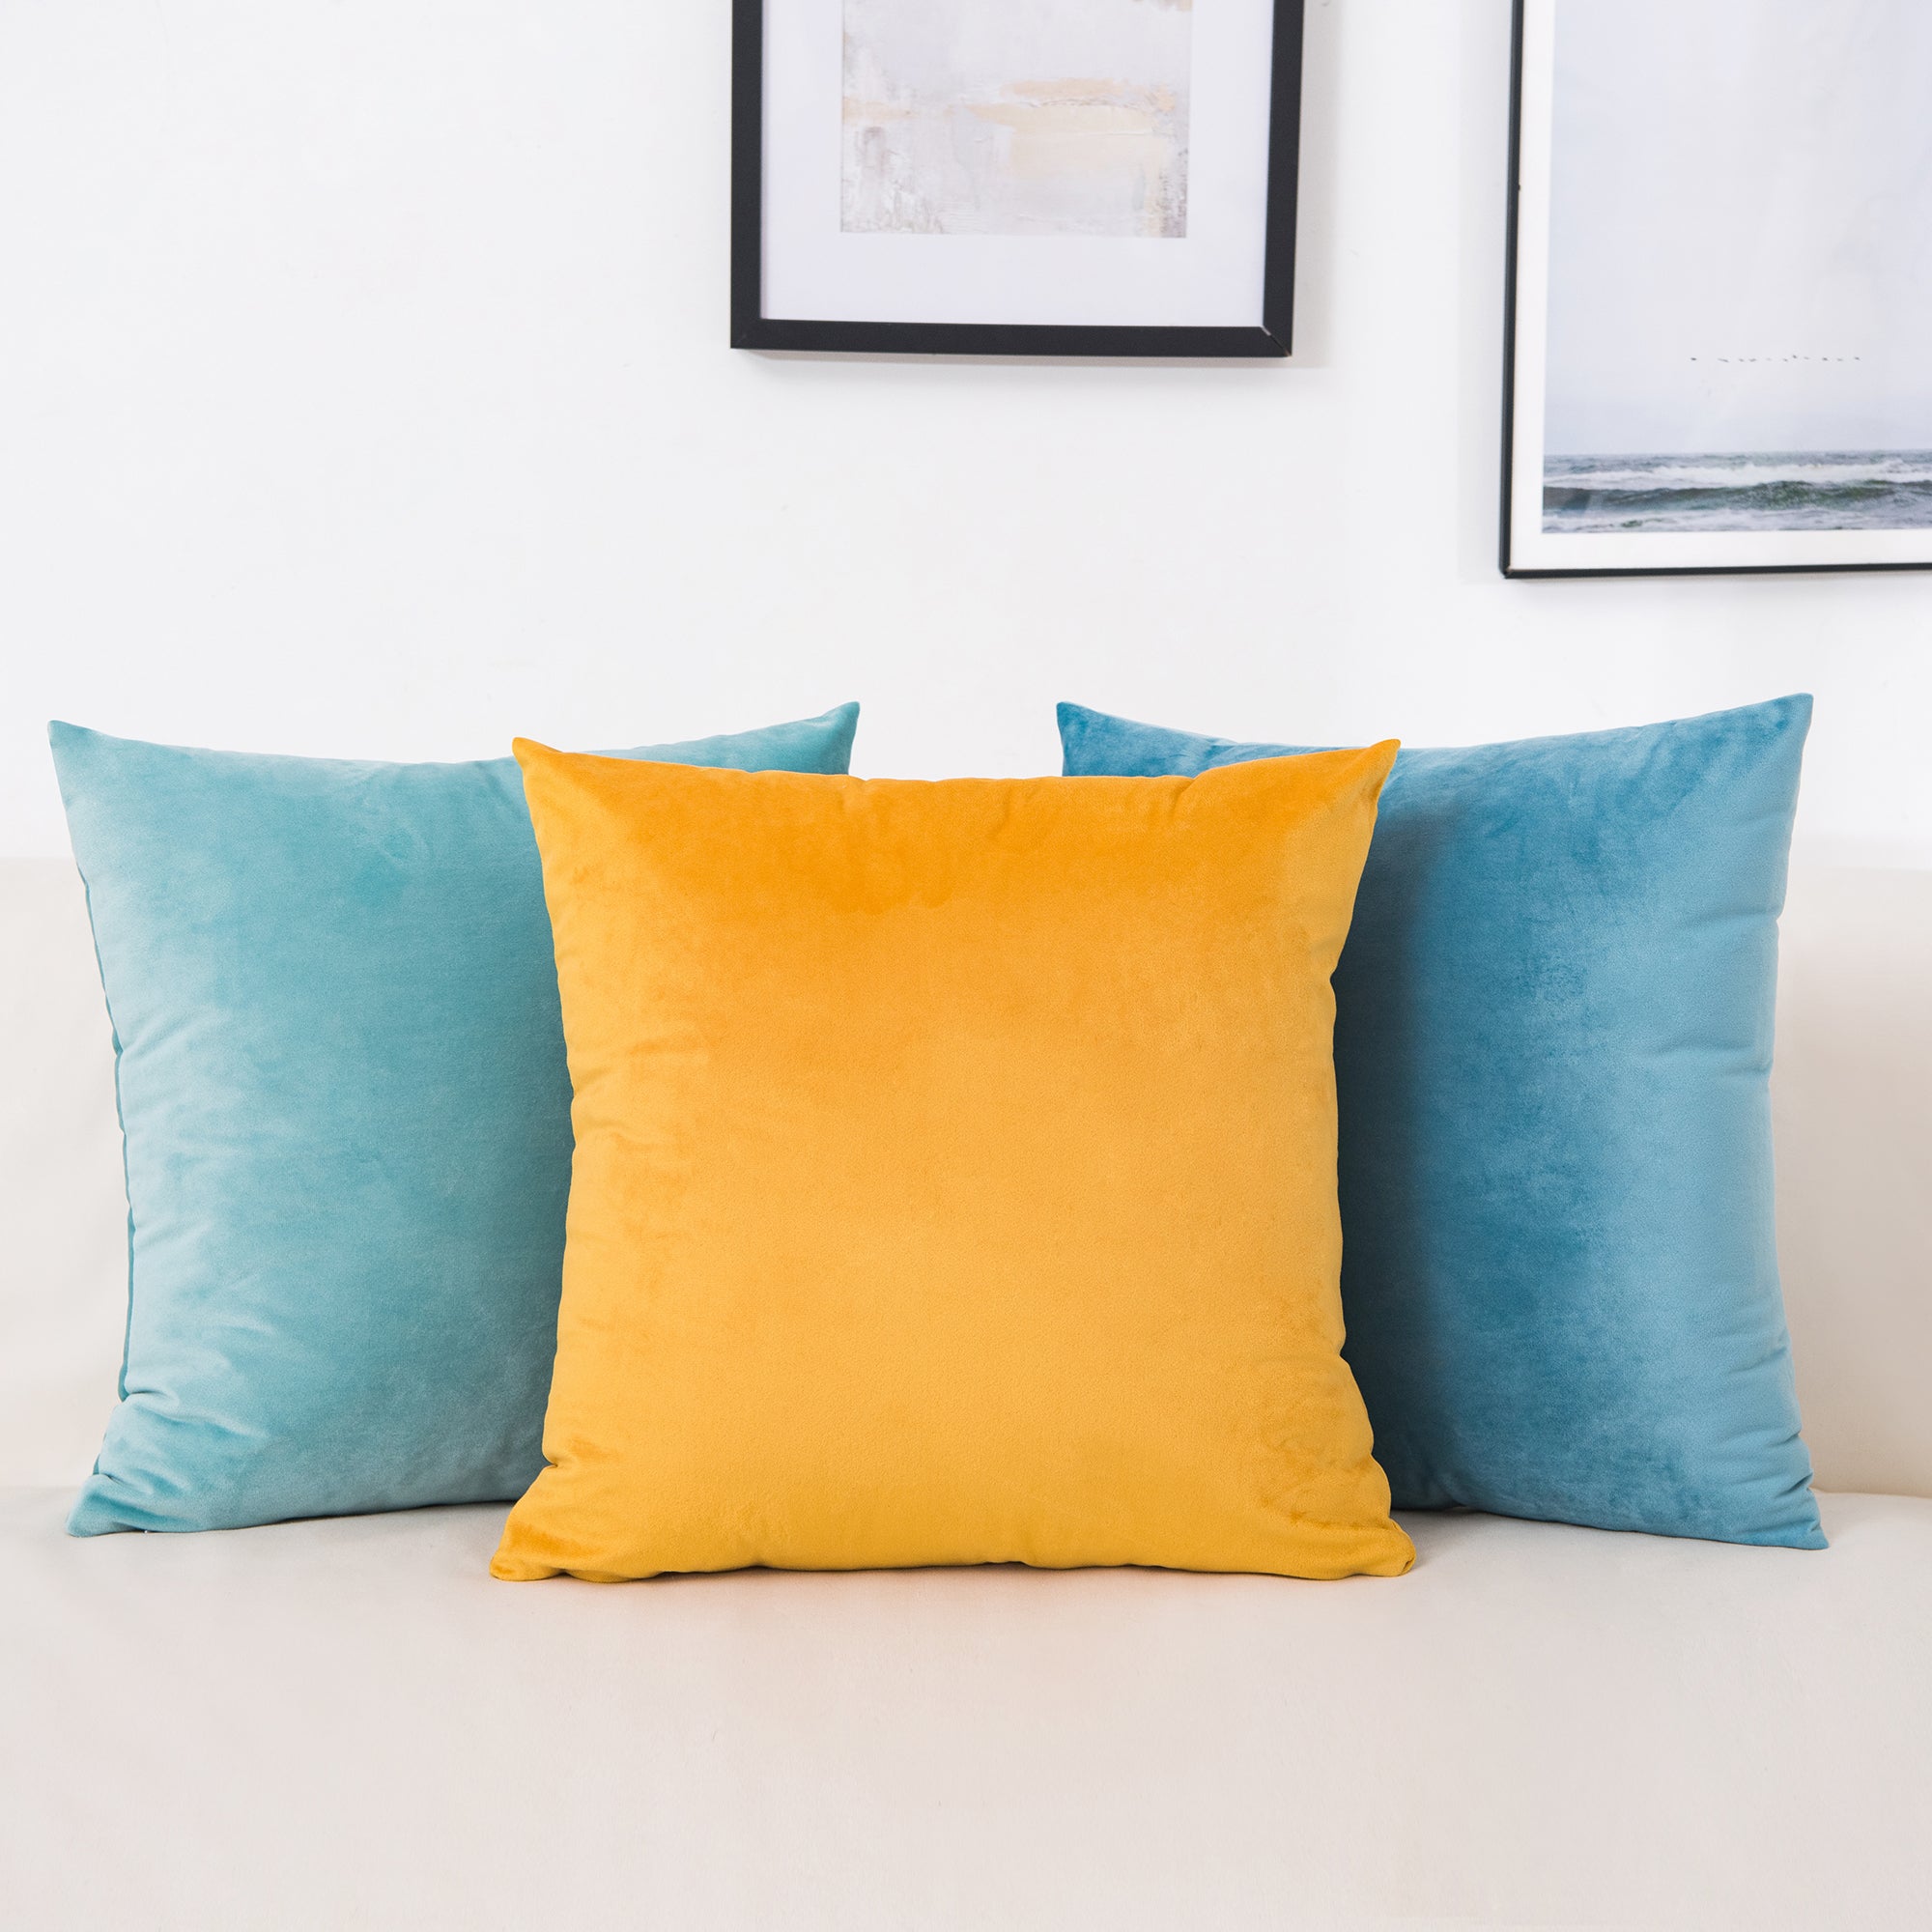 Velvet Fabric Cushion Cover ( 8 color options)